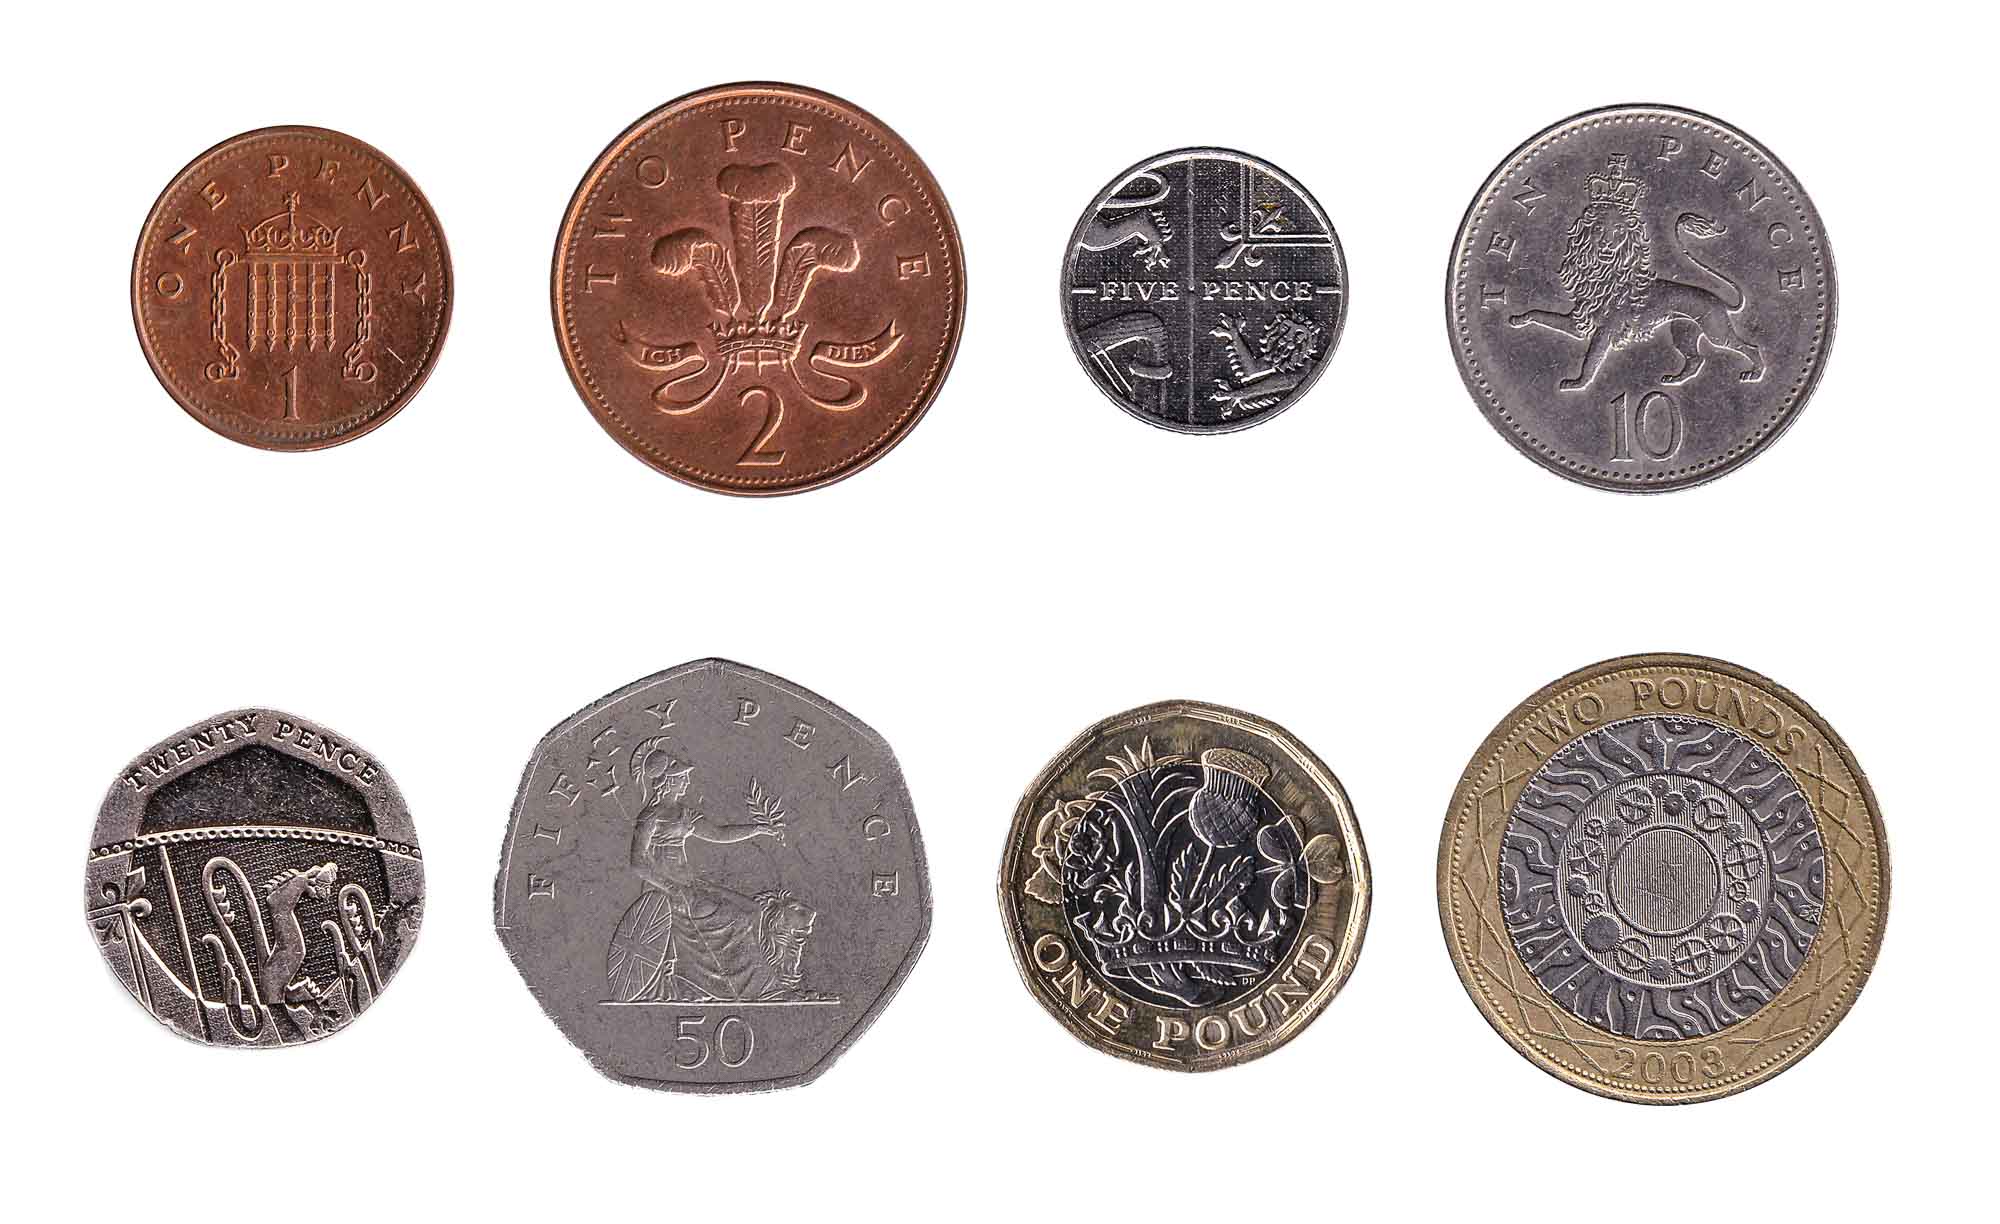 legal-tender-coins-uk-can-i-pay-a-bill-with-pennies-leftover-currency